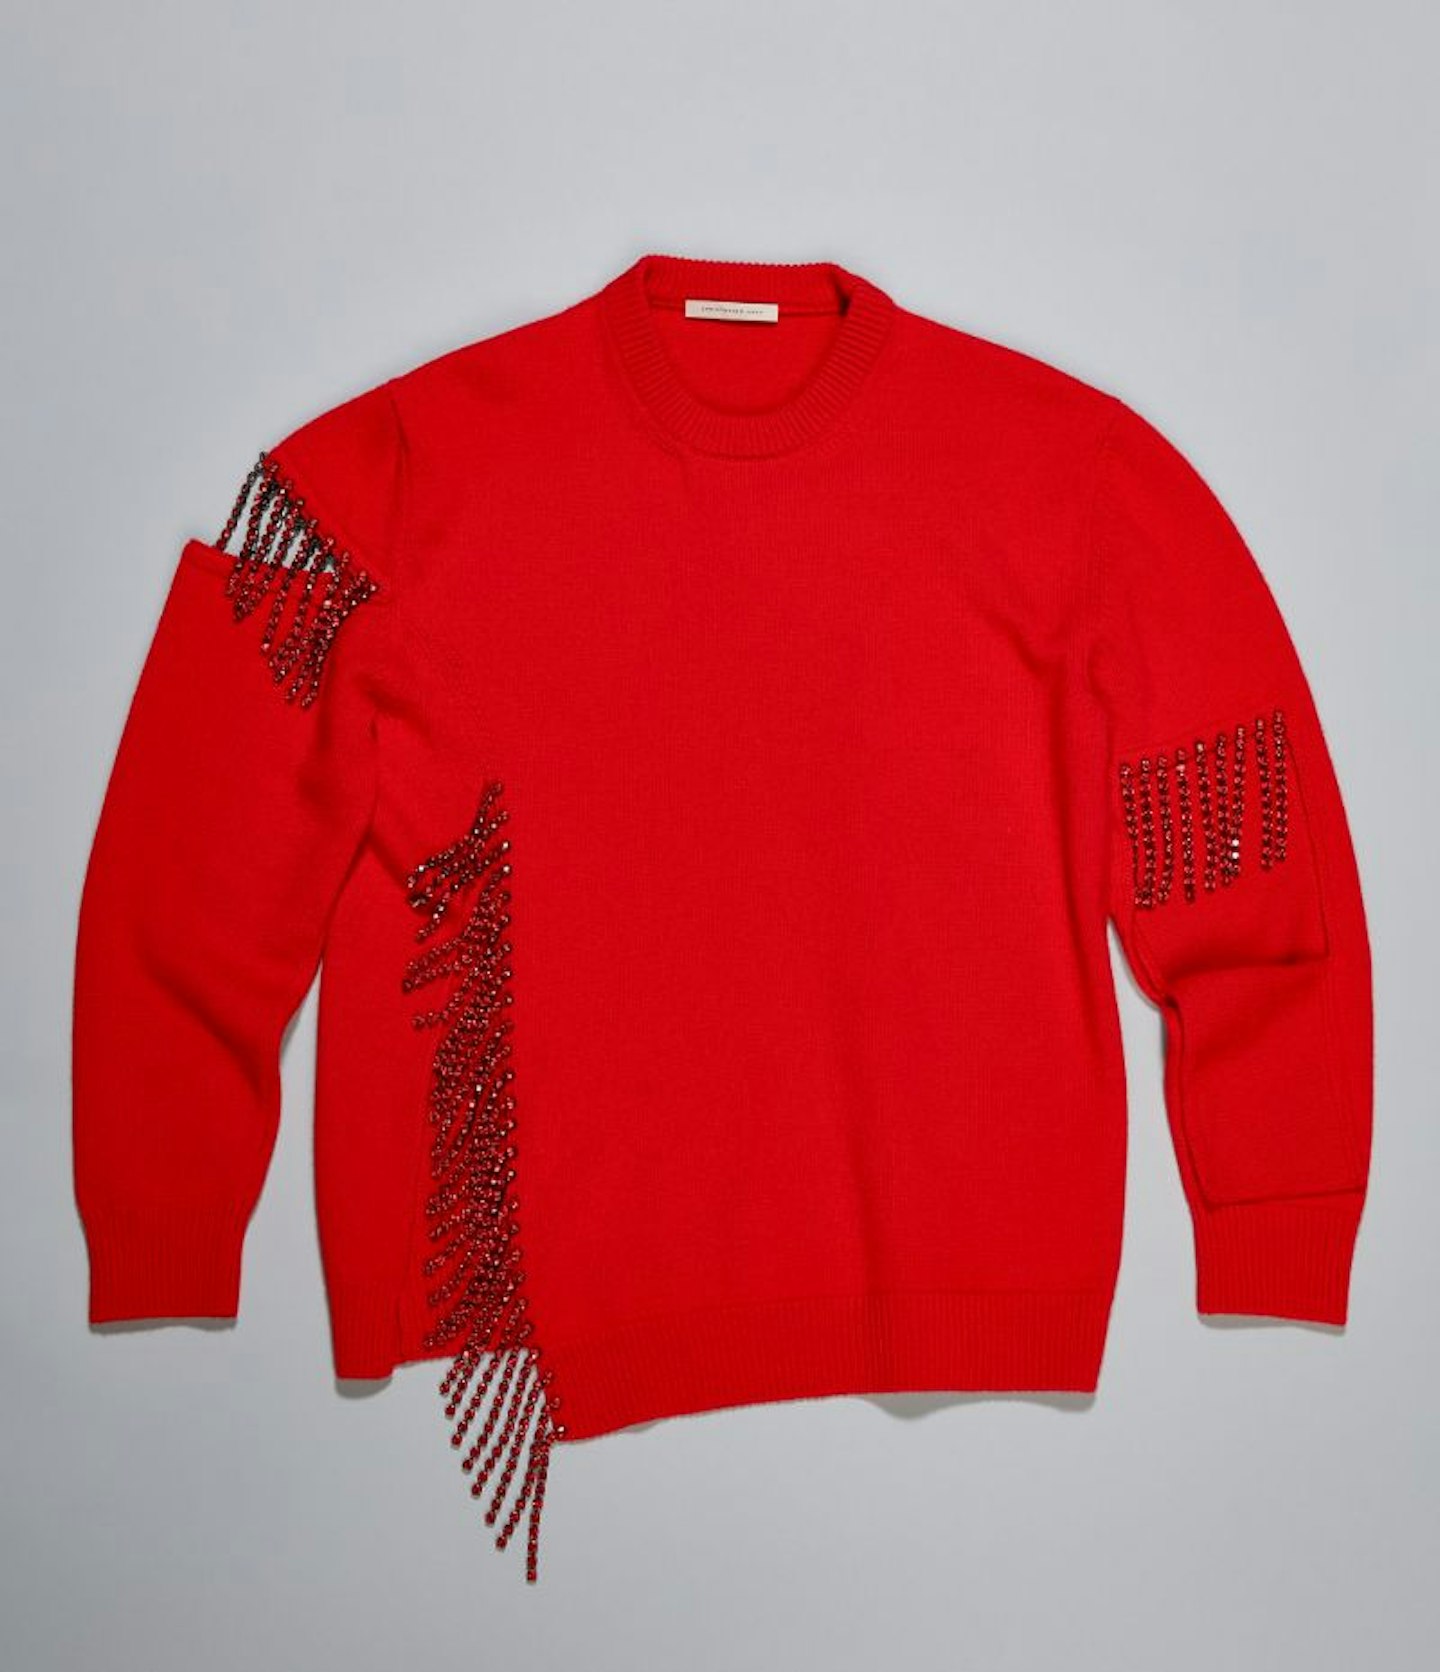 Christopher Kane, Cut-Out Cupchain Knitted Sweater, £1,045